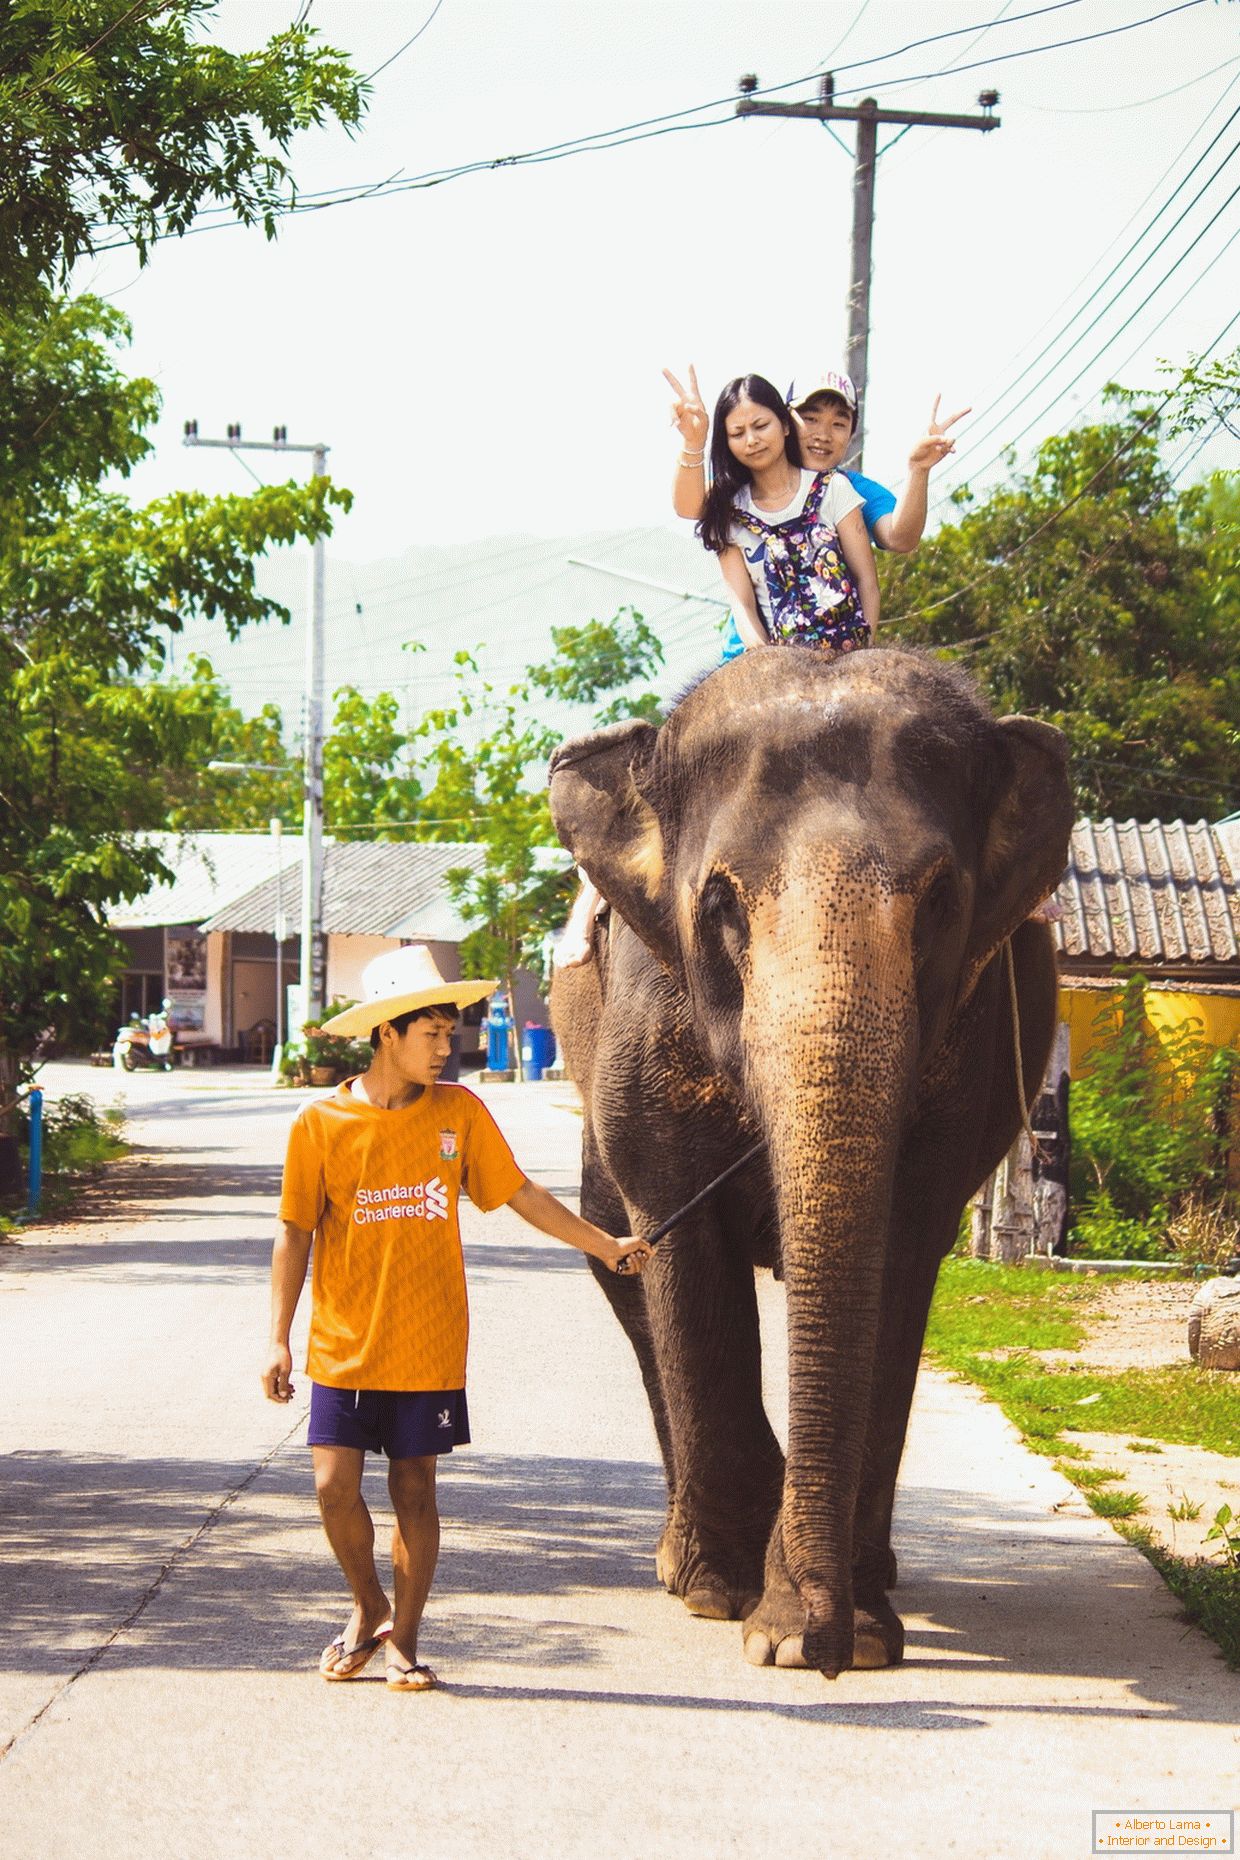 Traveling on an elephant